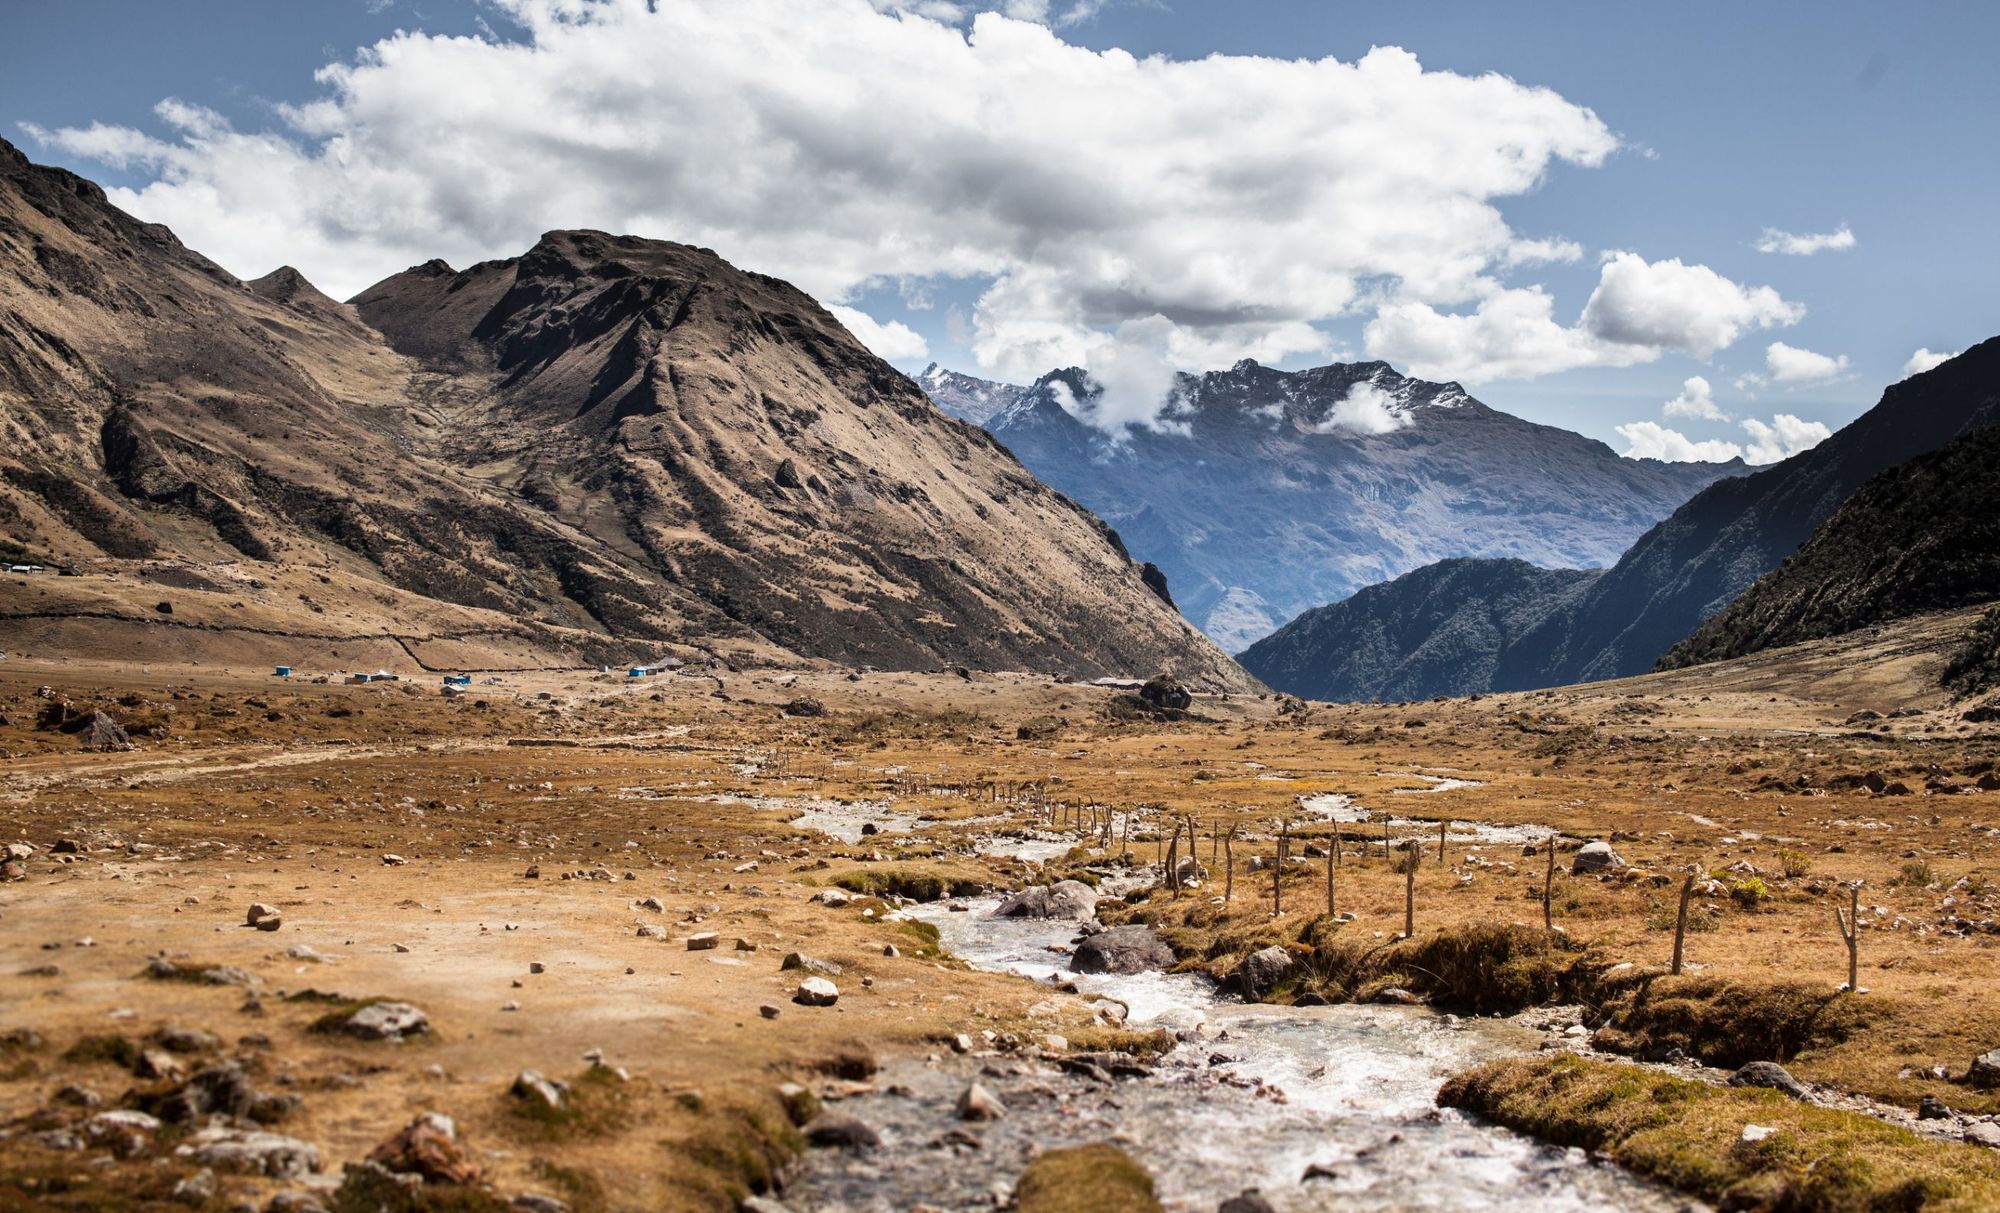 The landscape of Soraypampa, near Mollepata and the start of the trail. Photo: Getty